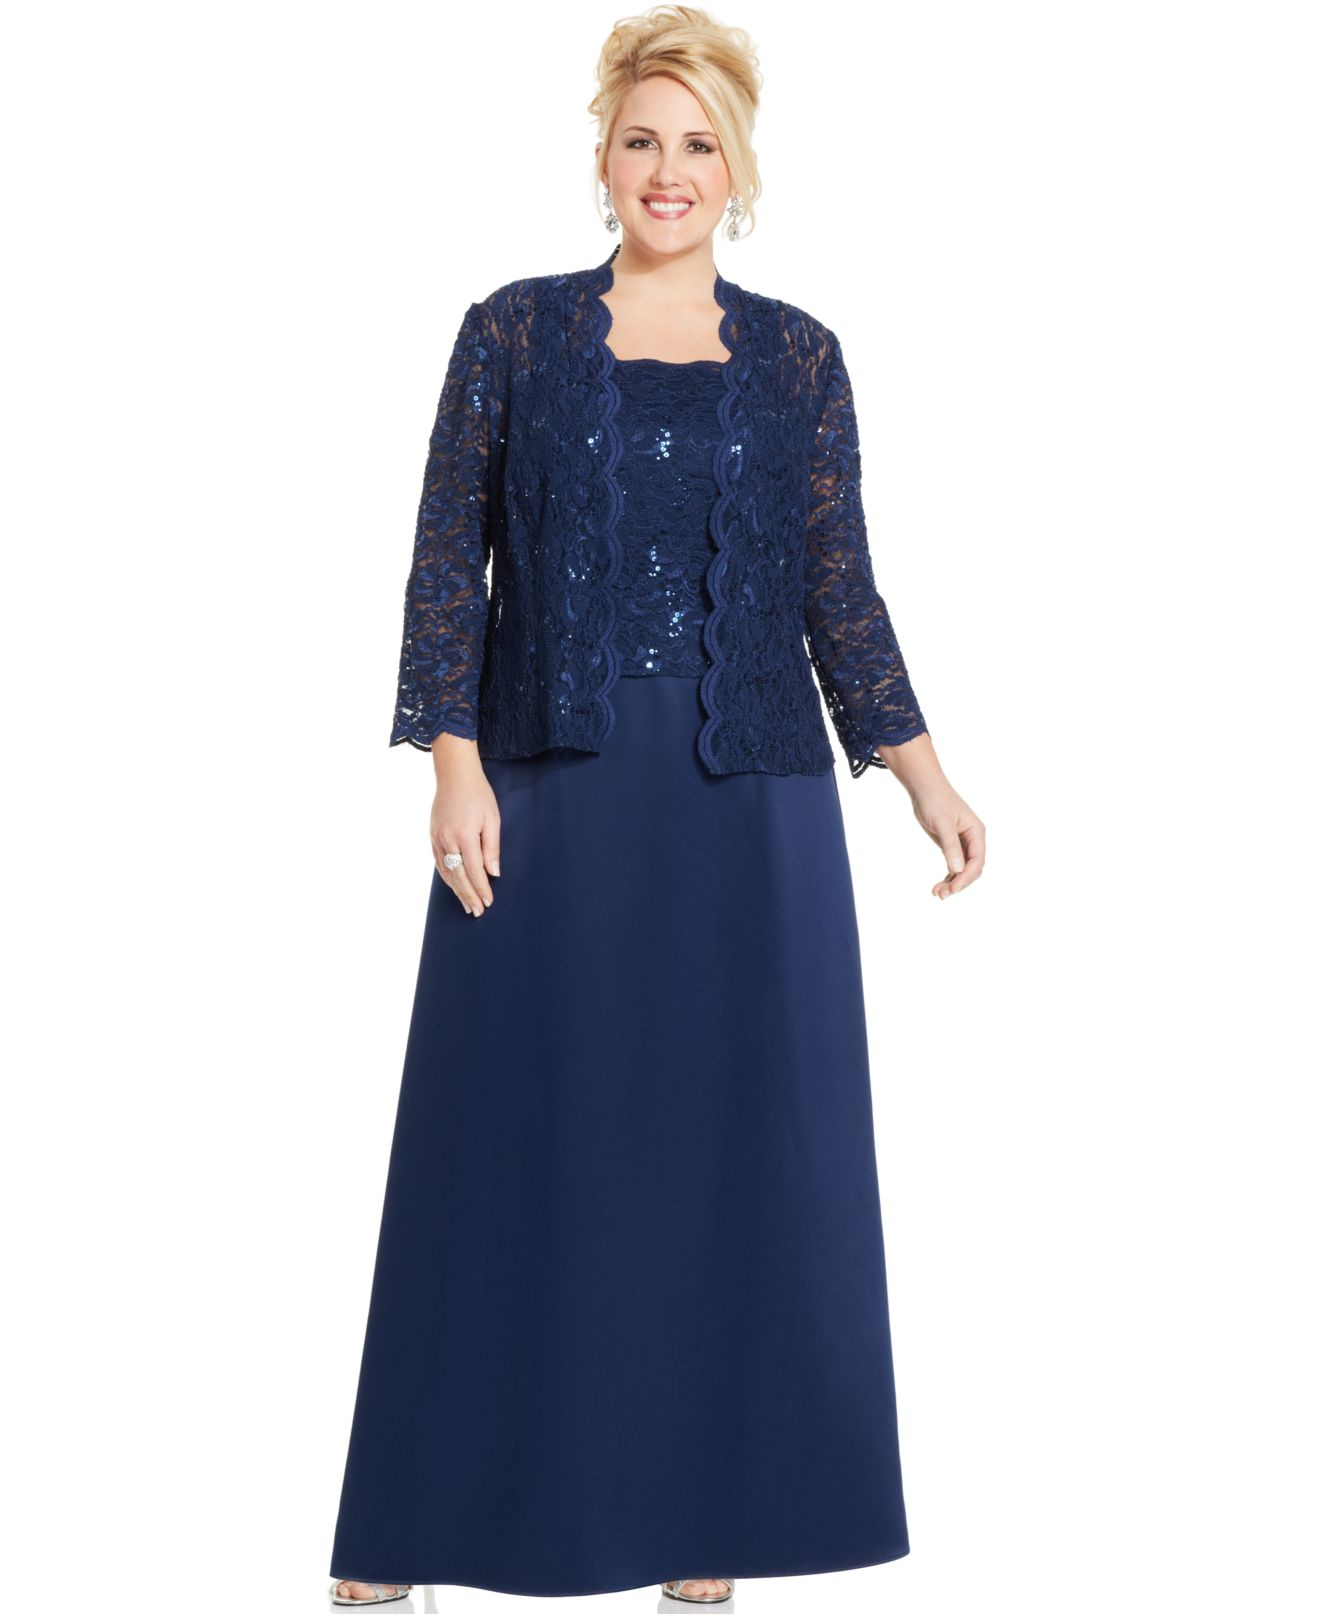 Alex Evenings Plus Size Sequin Lace Gown And Jacket in Navy (Blue) - Lyst